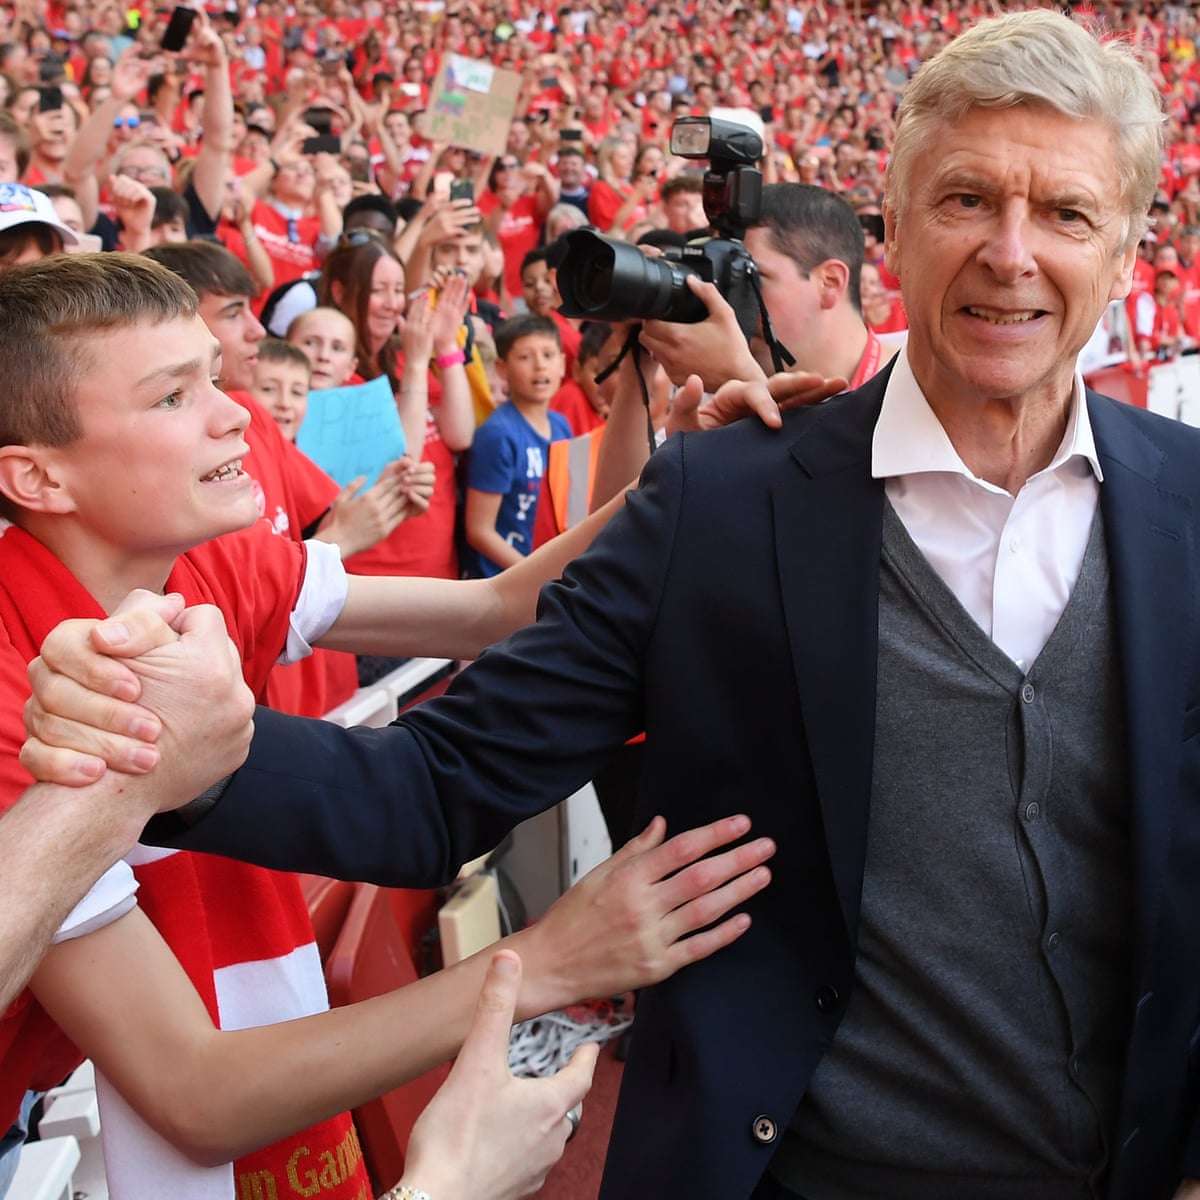 Arsène Wenger says goodbye but 'will cherish every moment I was here' |  Premier League | The Guardian